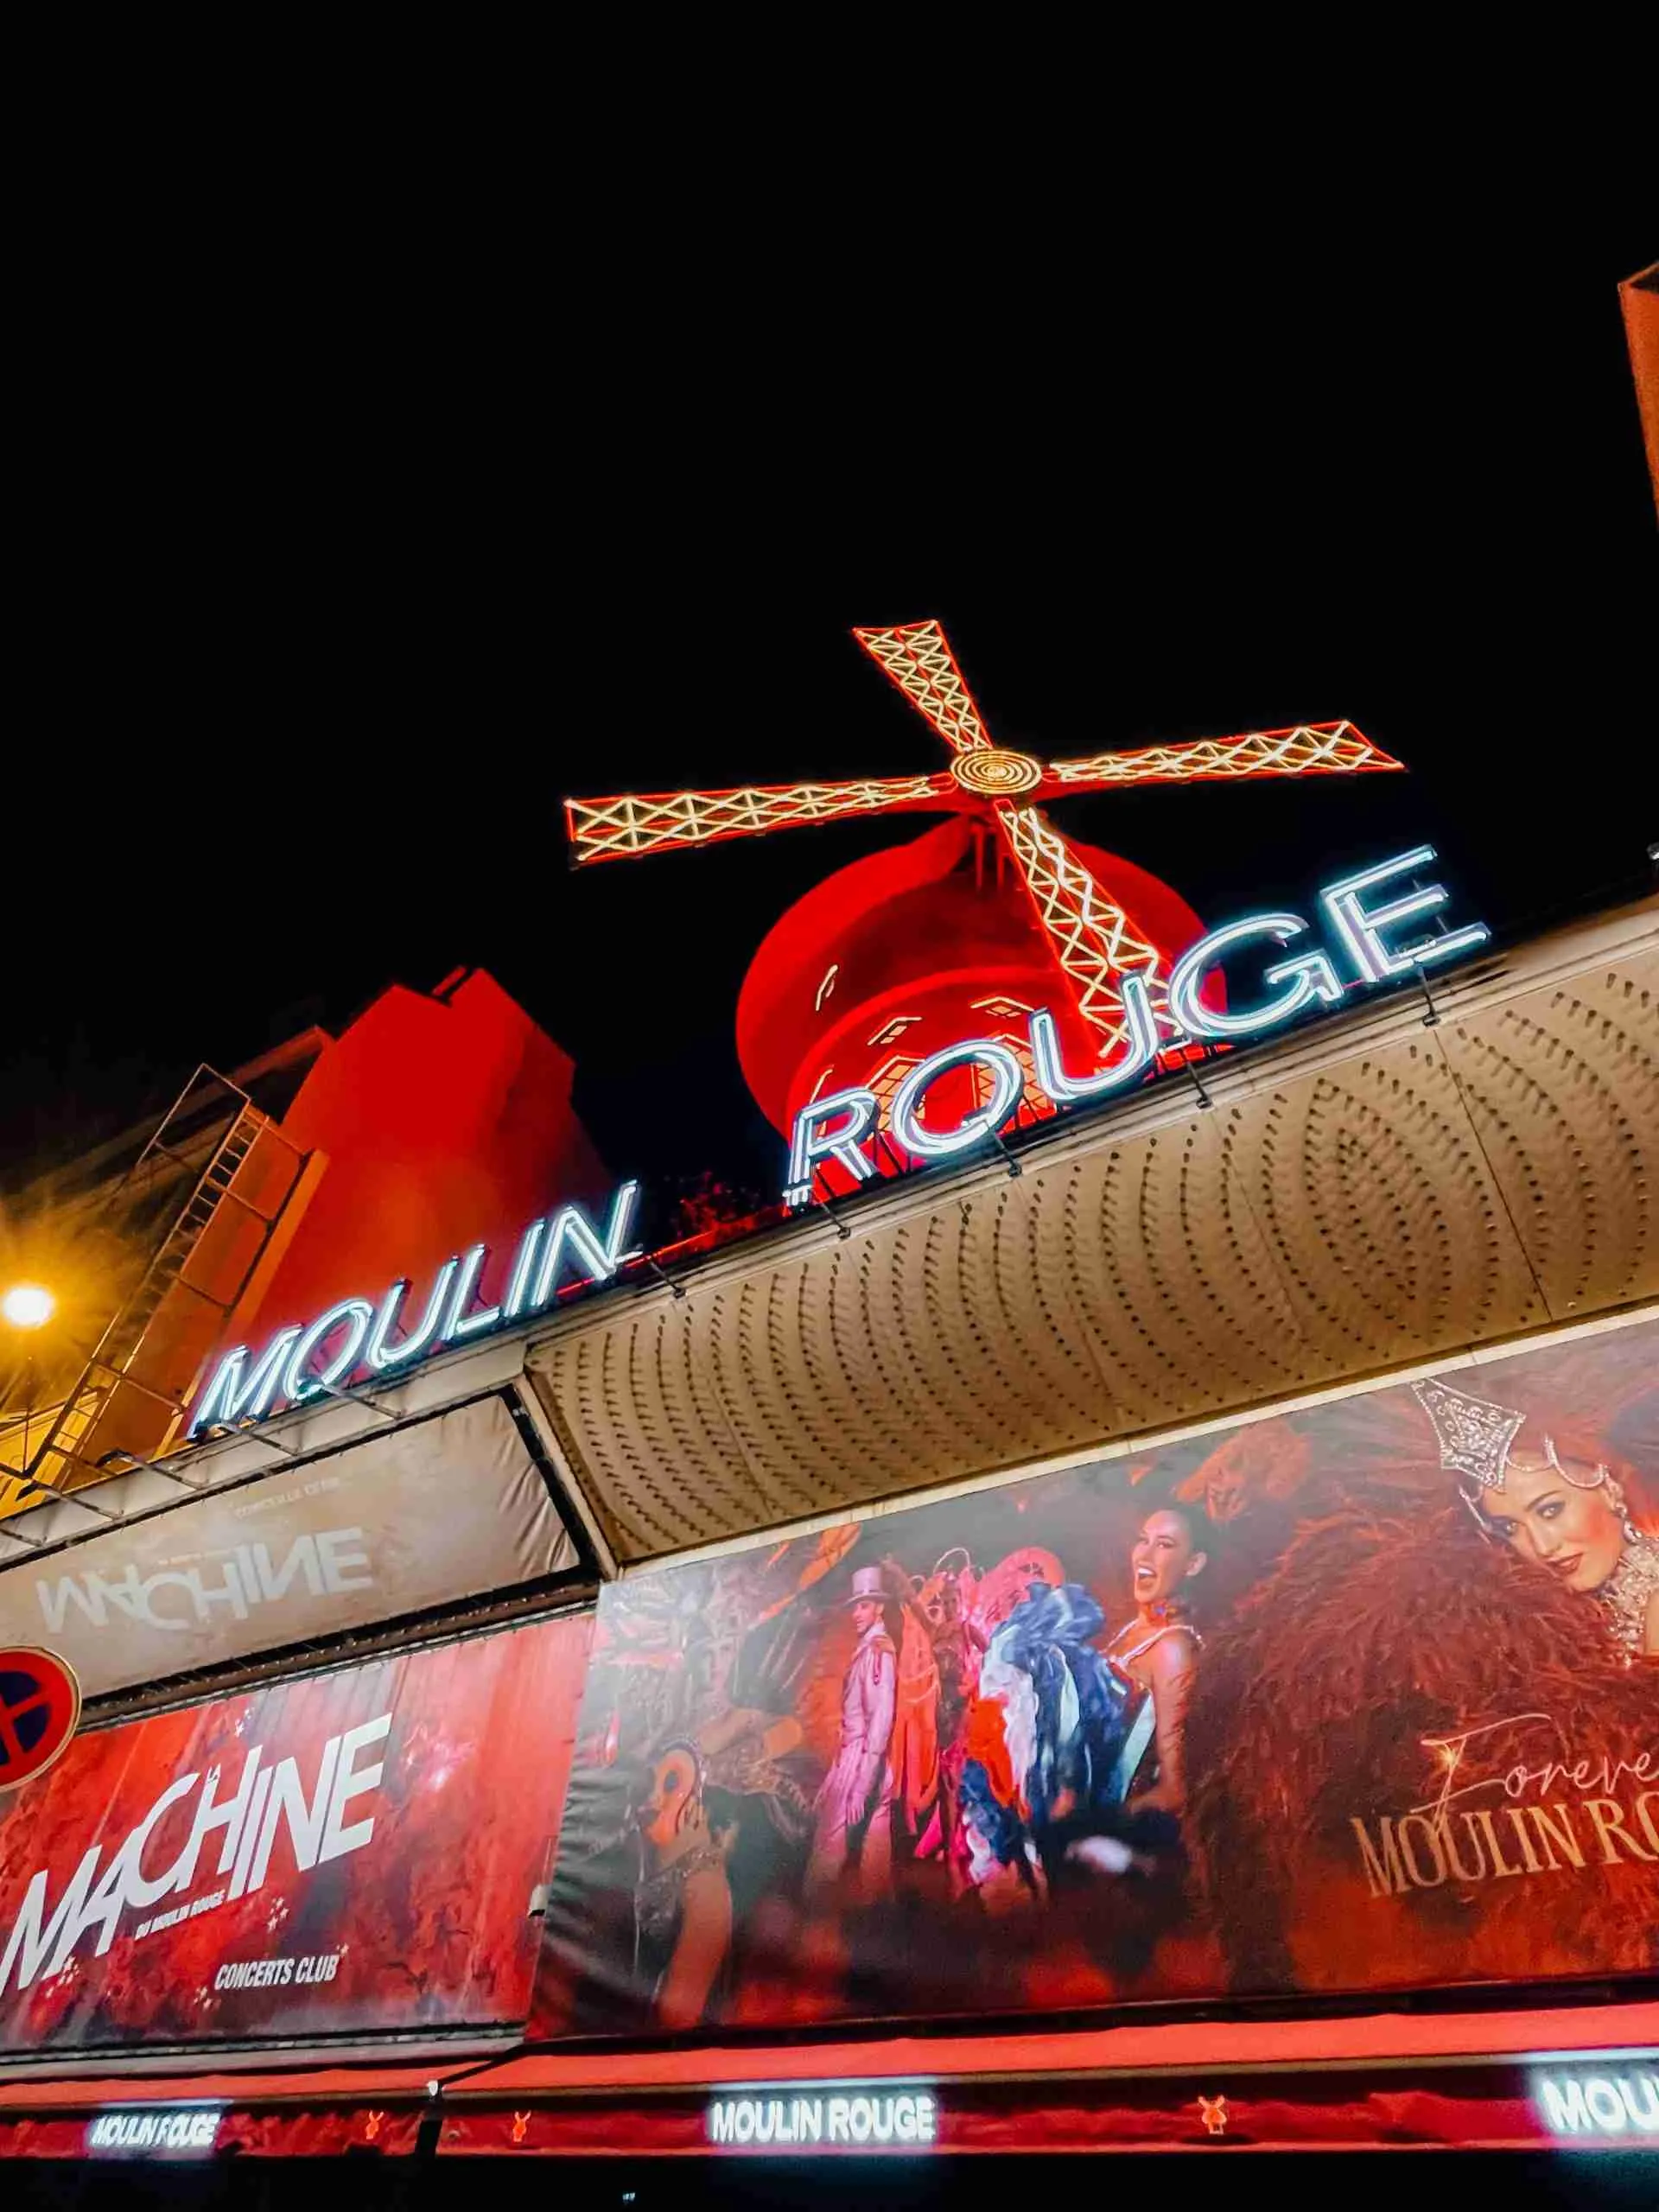 outside of the Moulin Rouge at night 